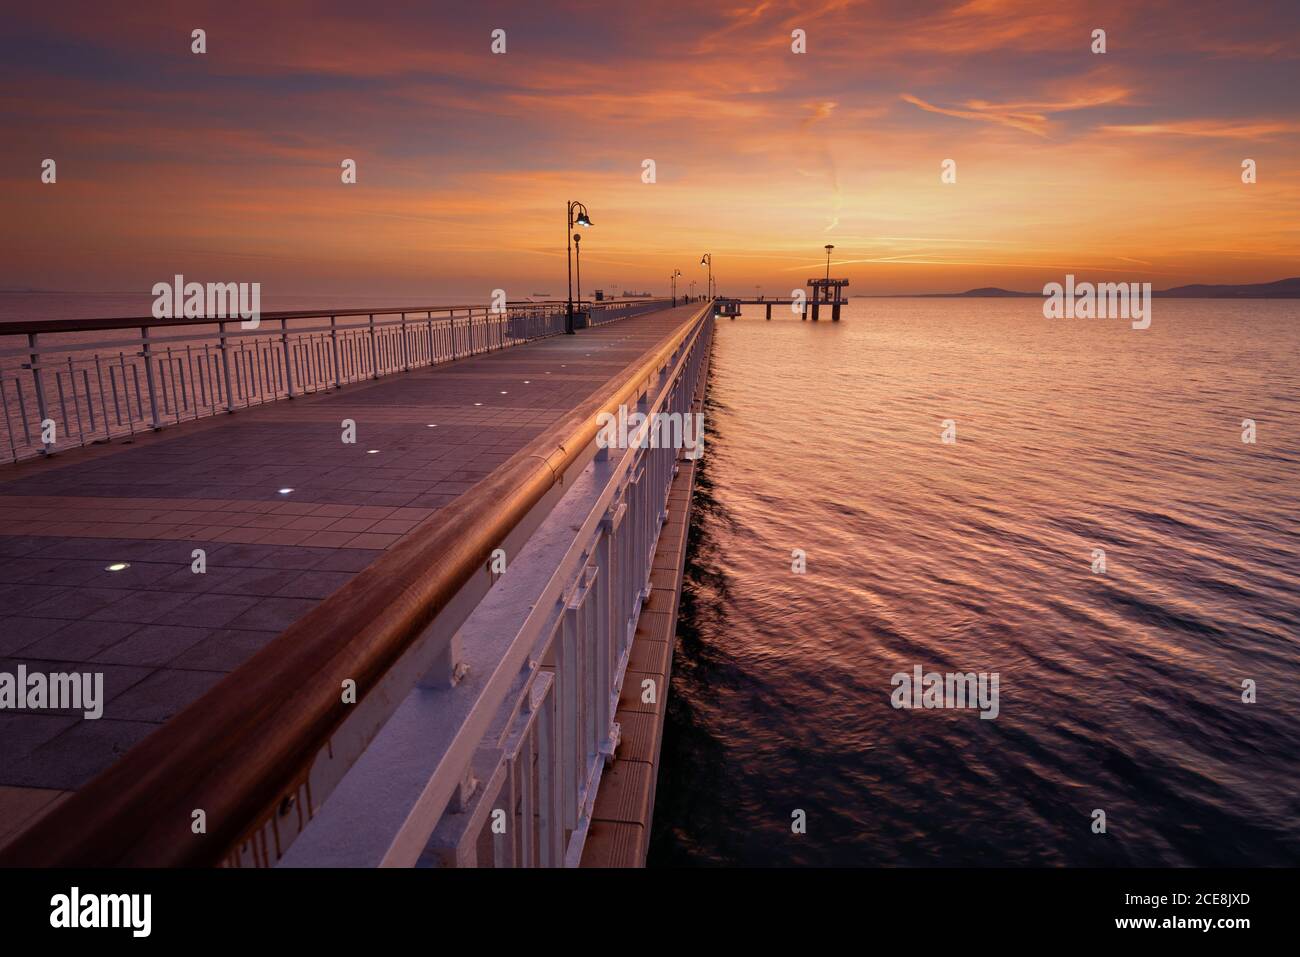 Dramatic sunrise on the beach in Burgas, Bulgaria. Sunrise on the Burgas Bridge. Bridge in Burgas - symbol of the city. Stock Photo